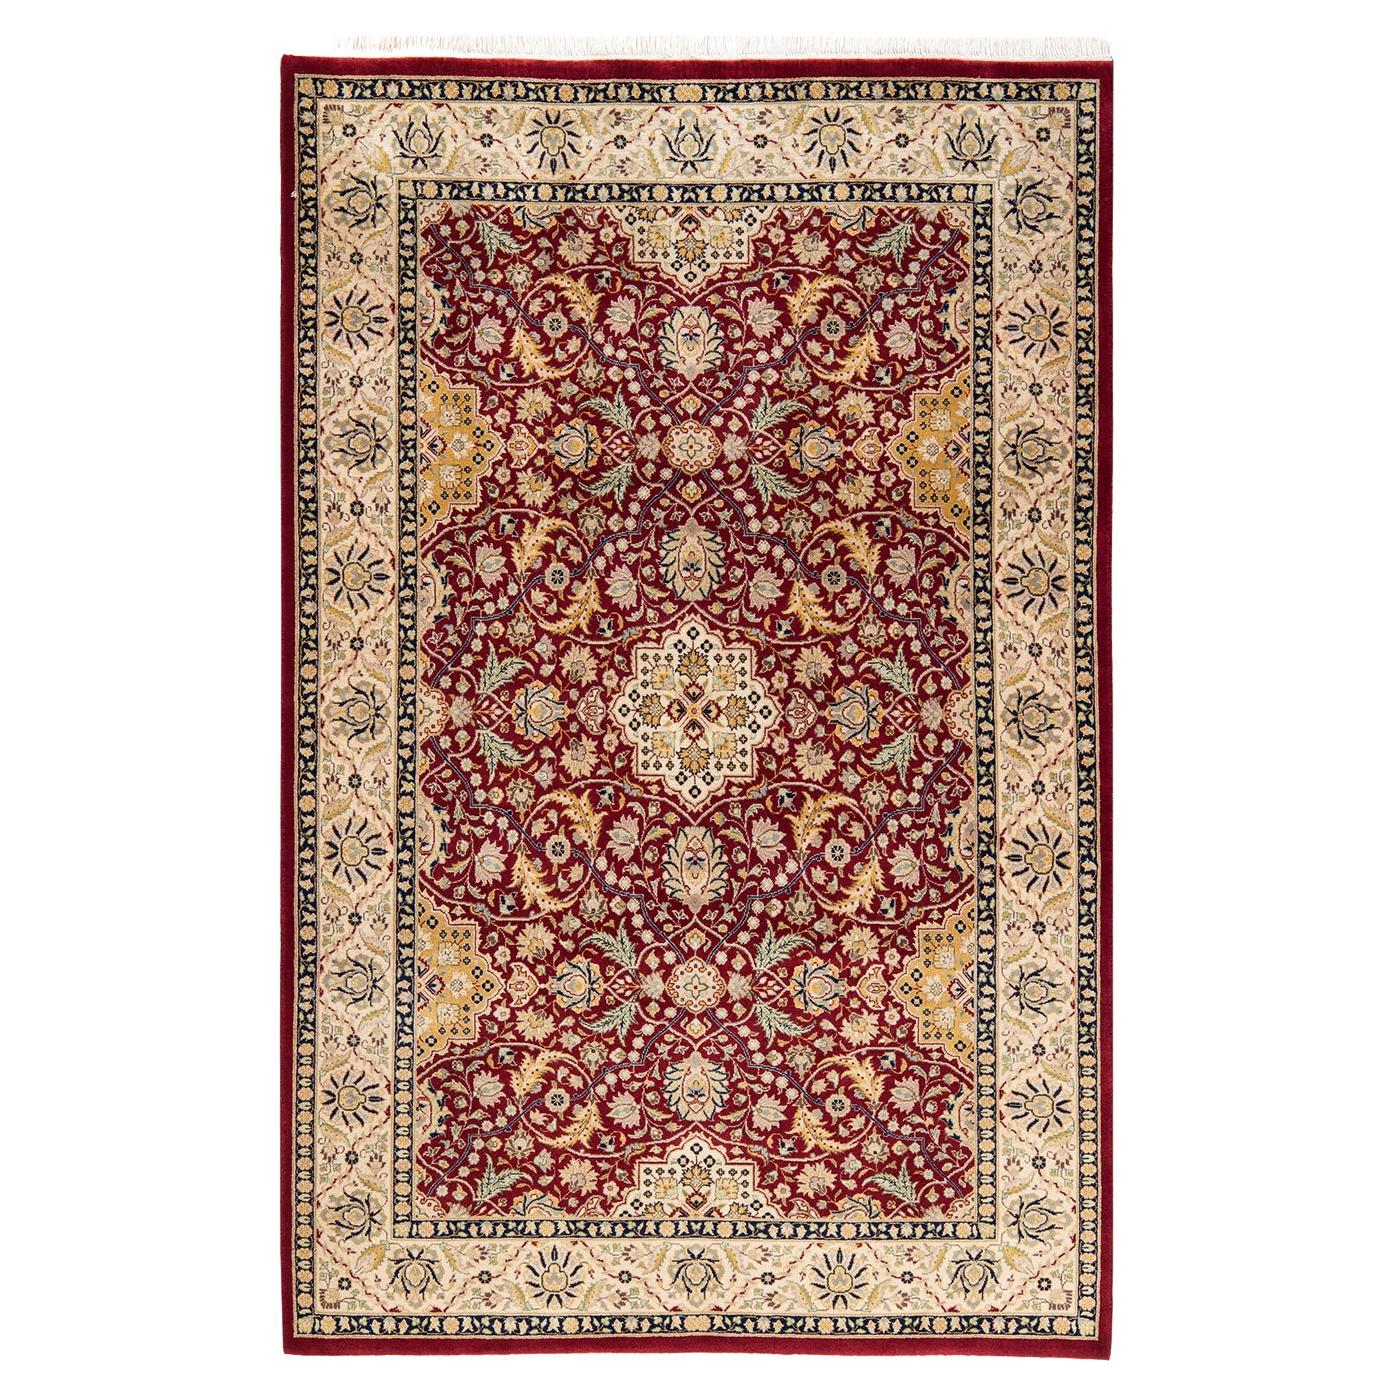 One-of-a-kind Hand Knotted Wool Mogul Red Area Rug